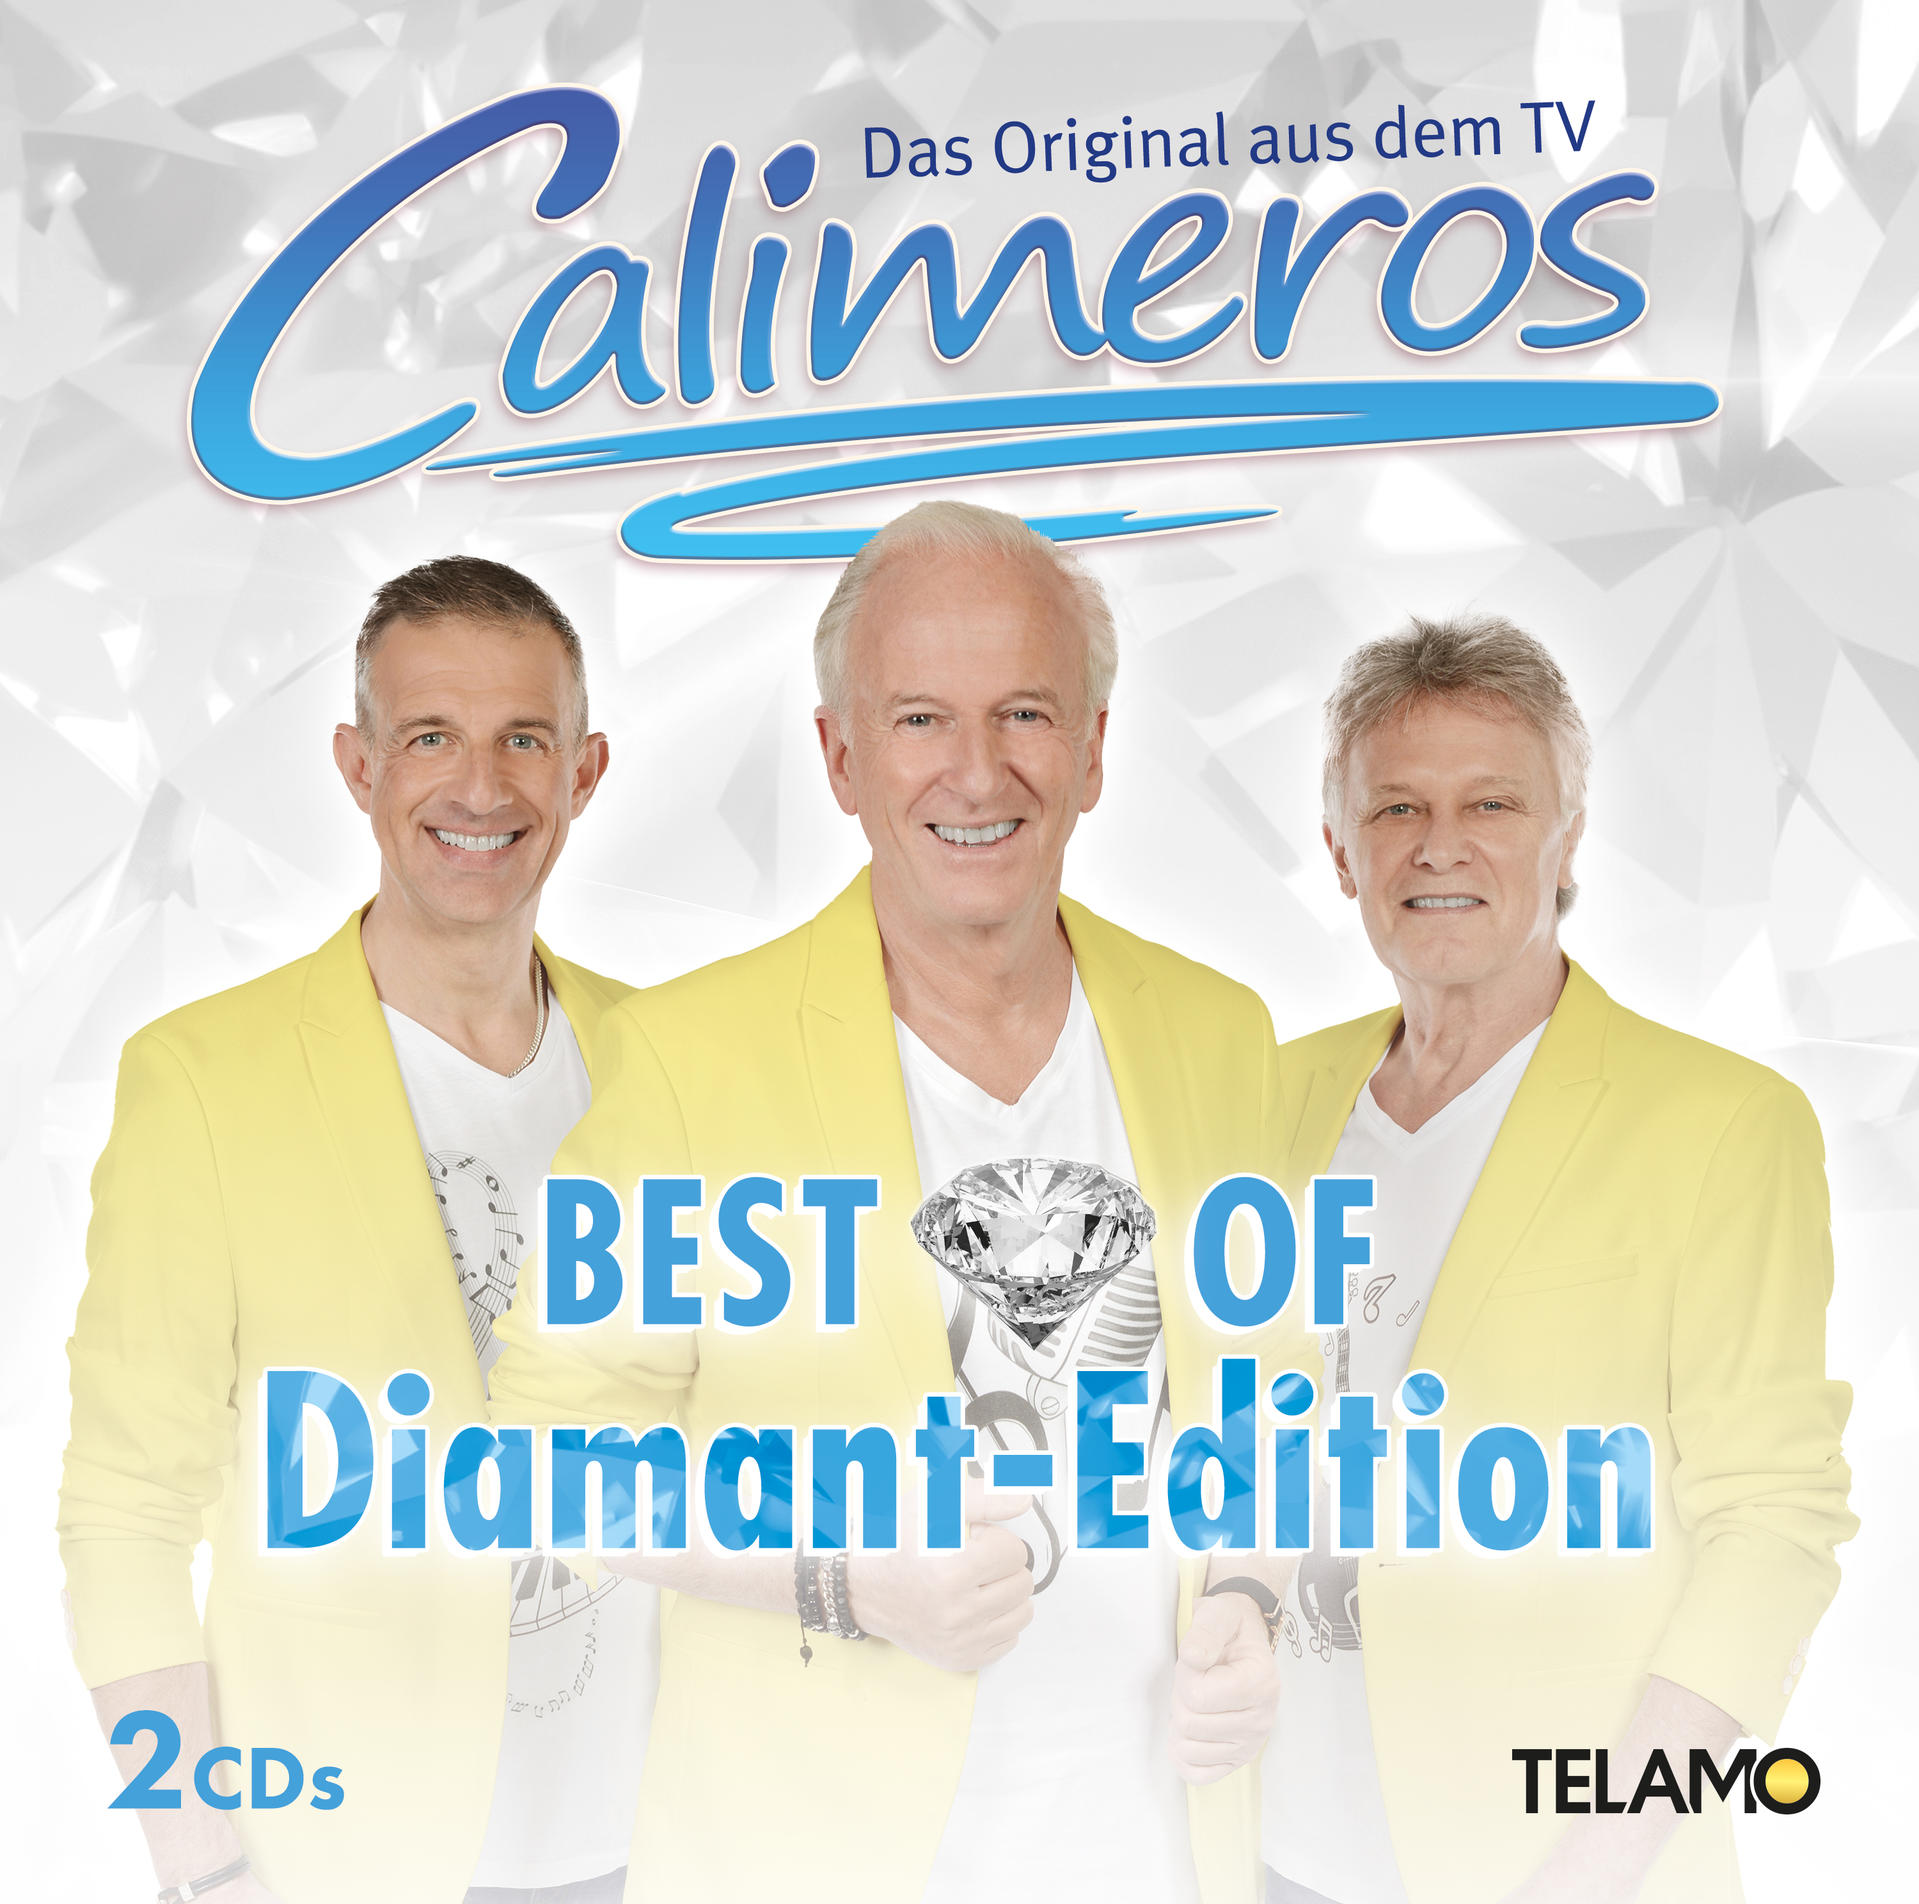 Of(Diamant-Edition) (CD) Calimeros - Best -